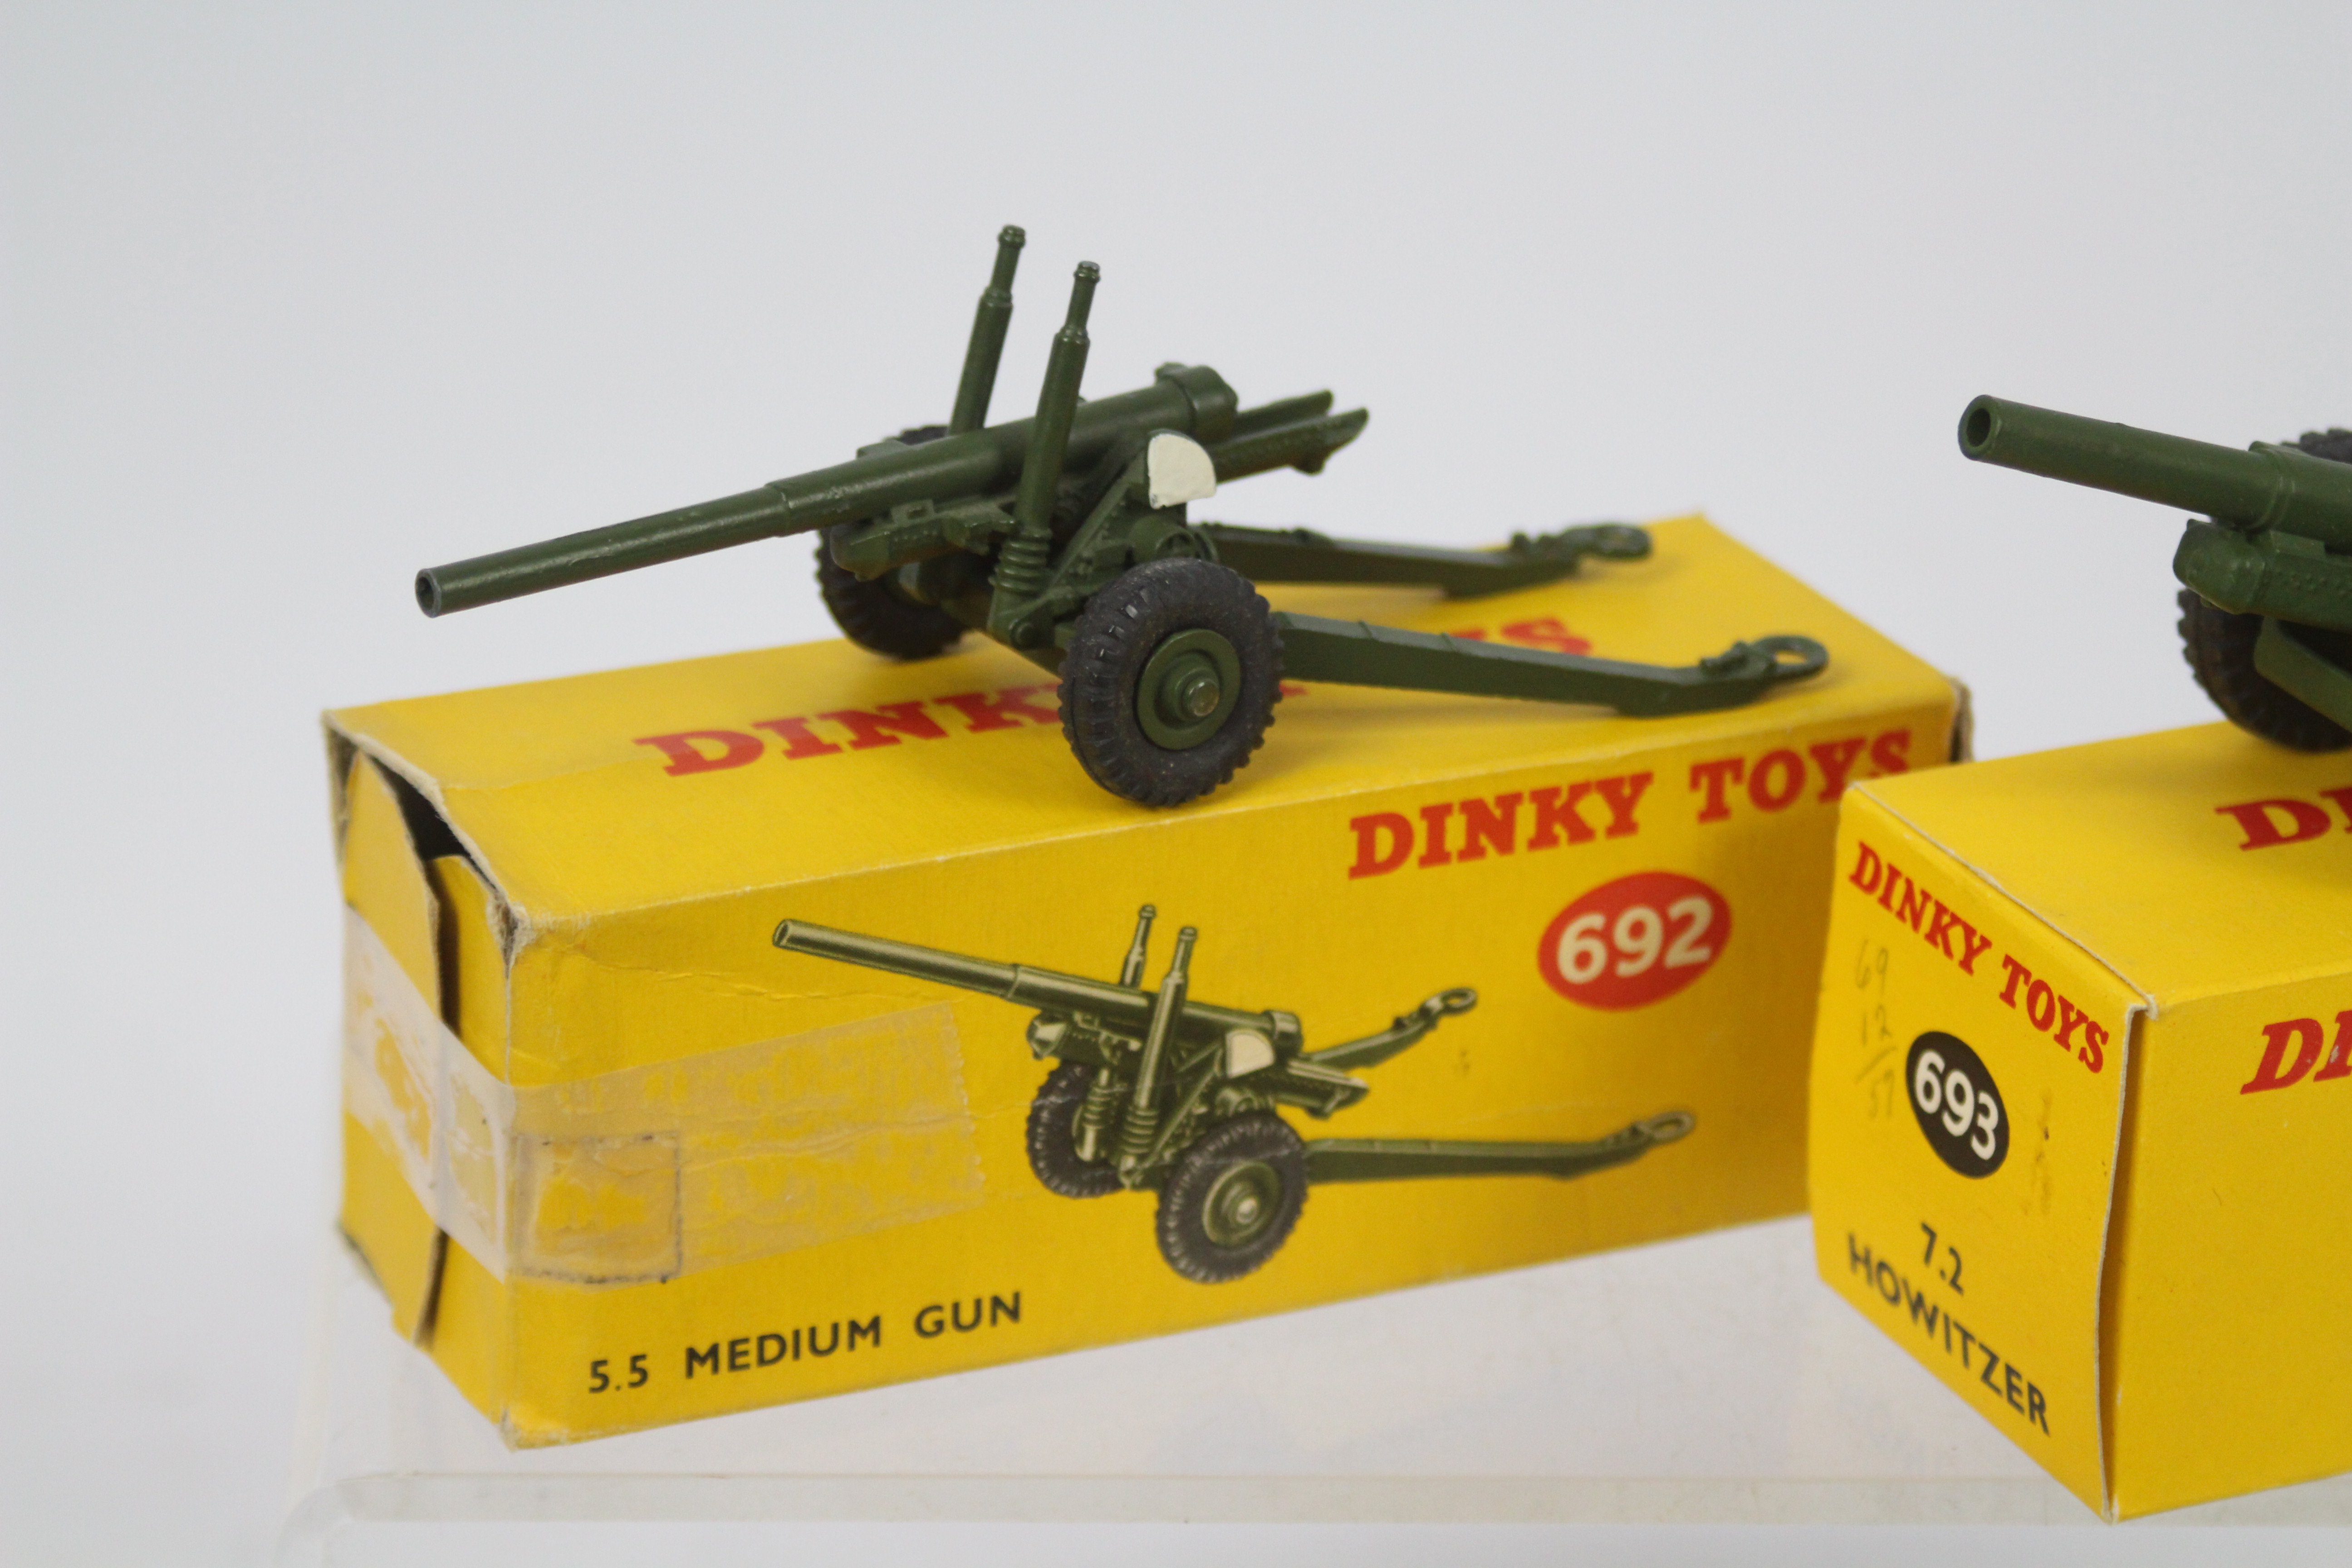 Dinky - Military - 3 x boxed Military models, an Armoured Car # 670, 5.5 Medium Gun # 692 and 7. - Image 2 of 4